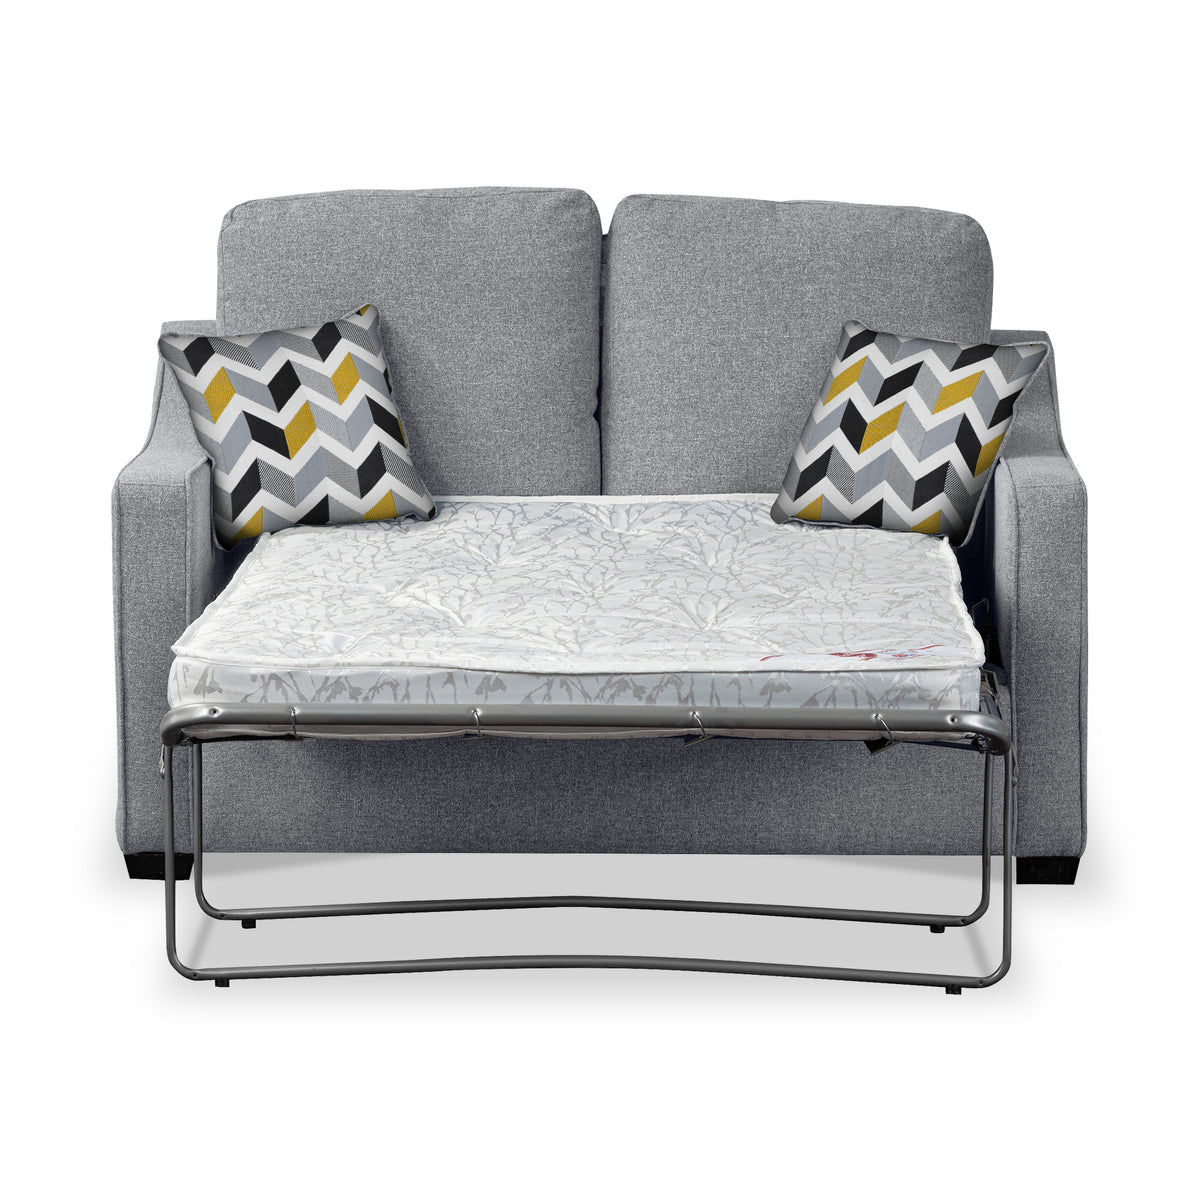 Charlcote Silver Faux Linen 2 Seater Sofabed with Mustard Scatter Cushions from Roseland Furniture